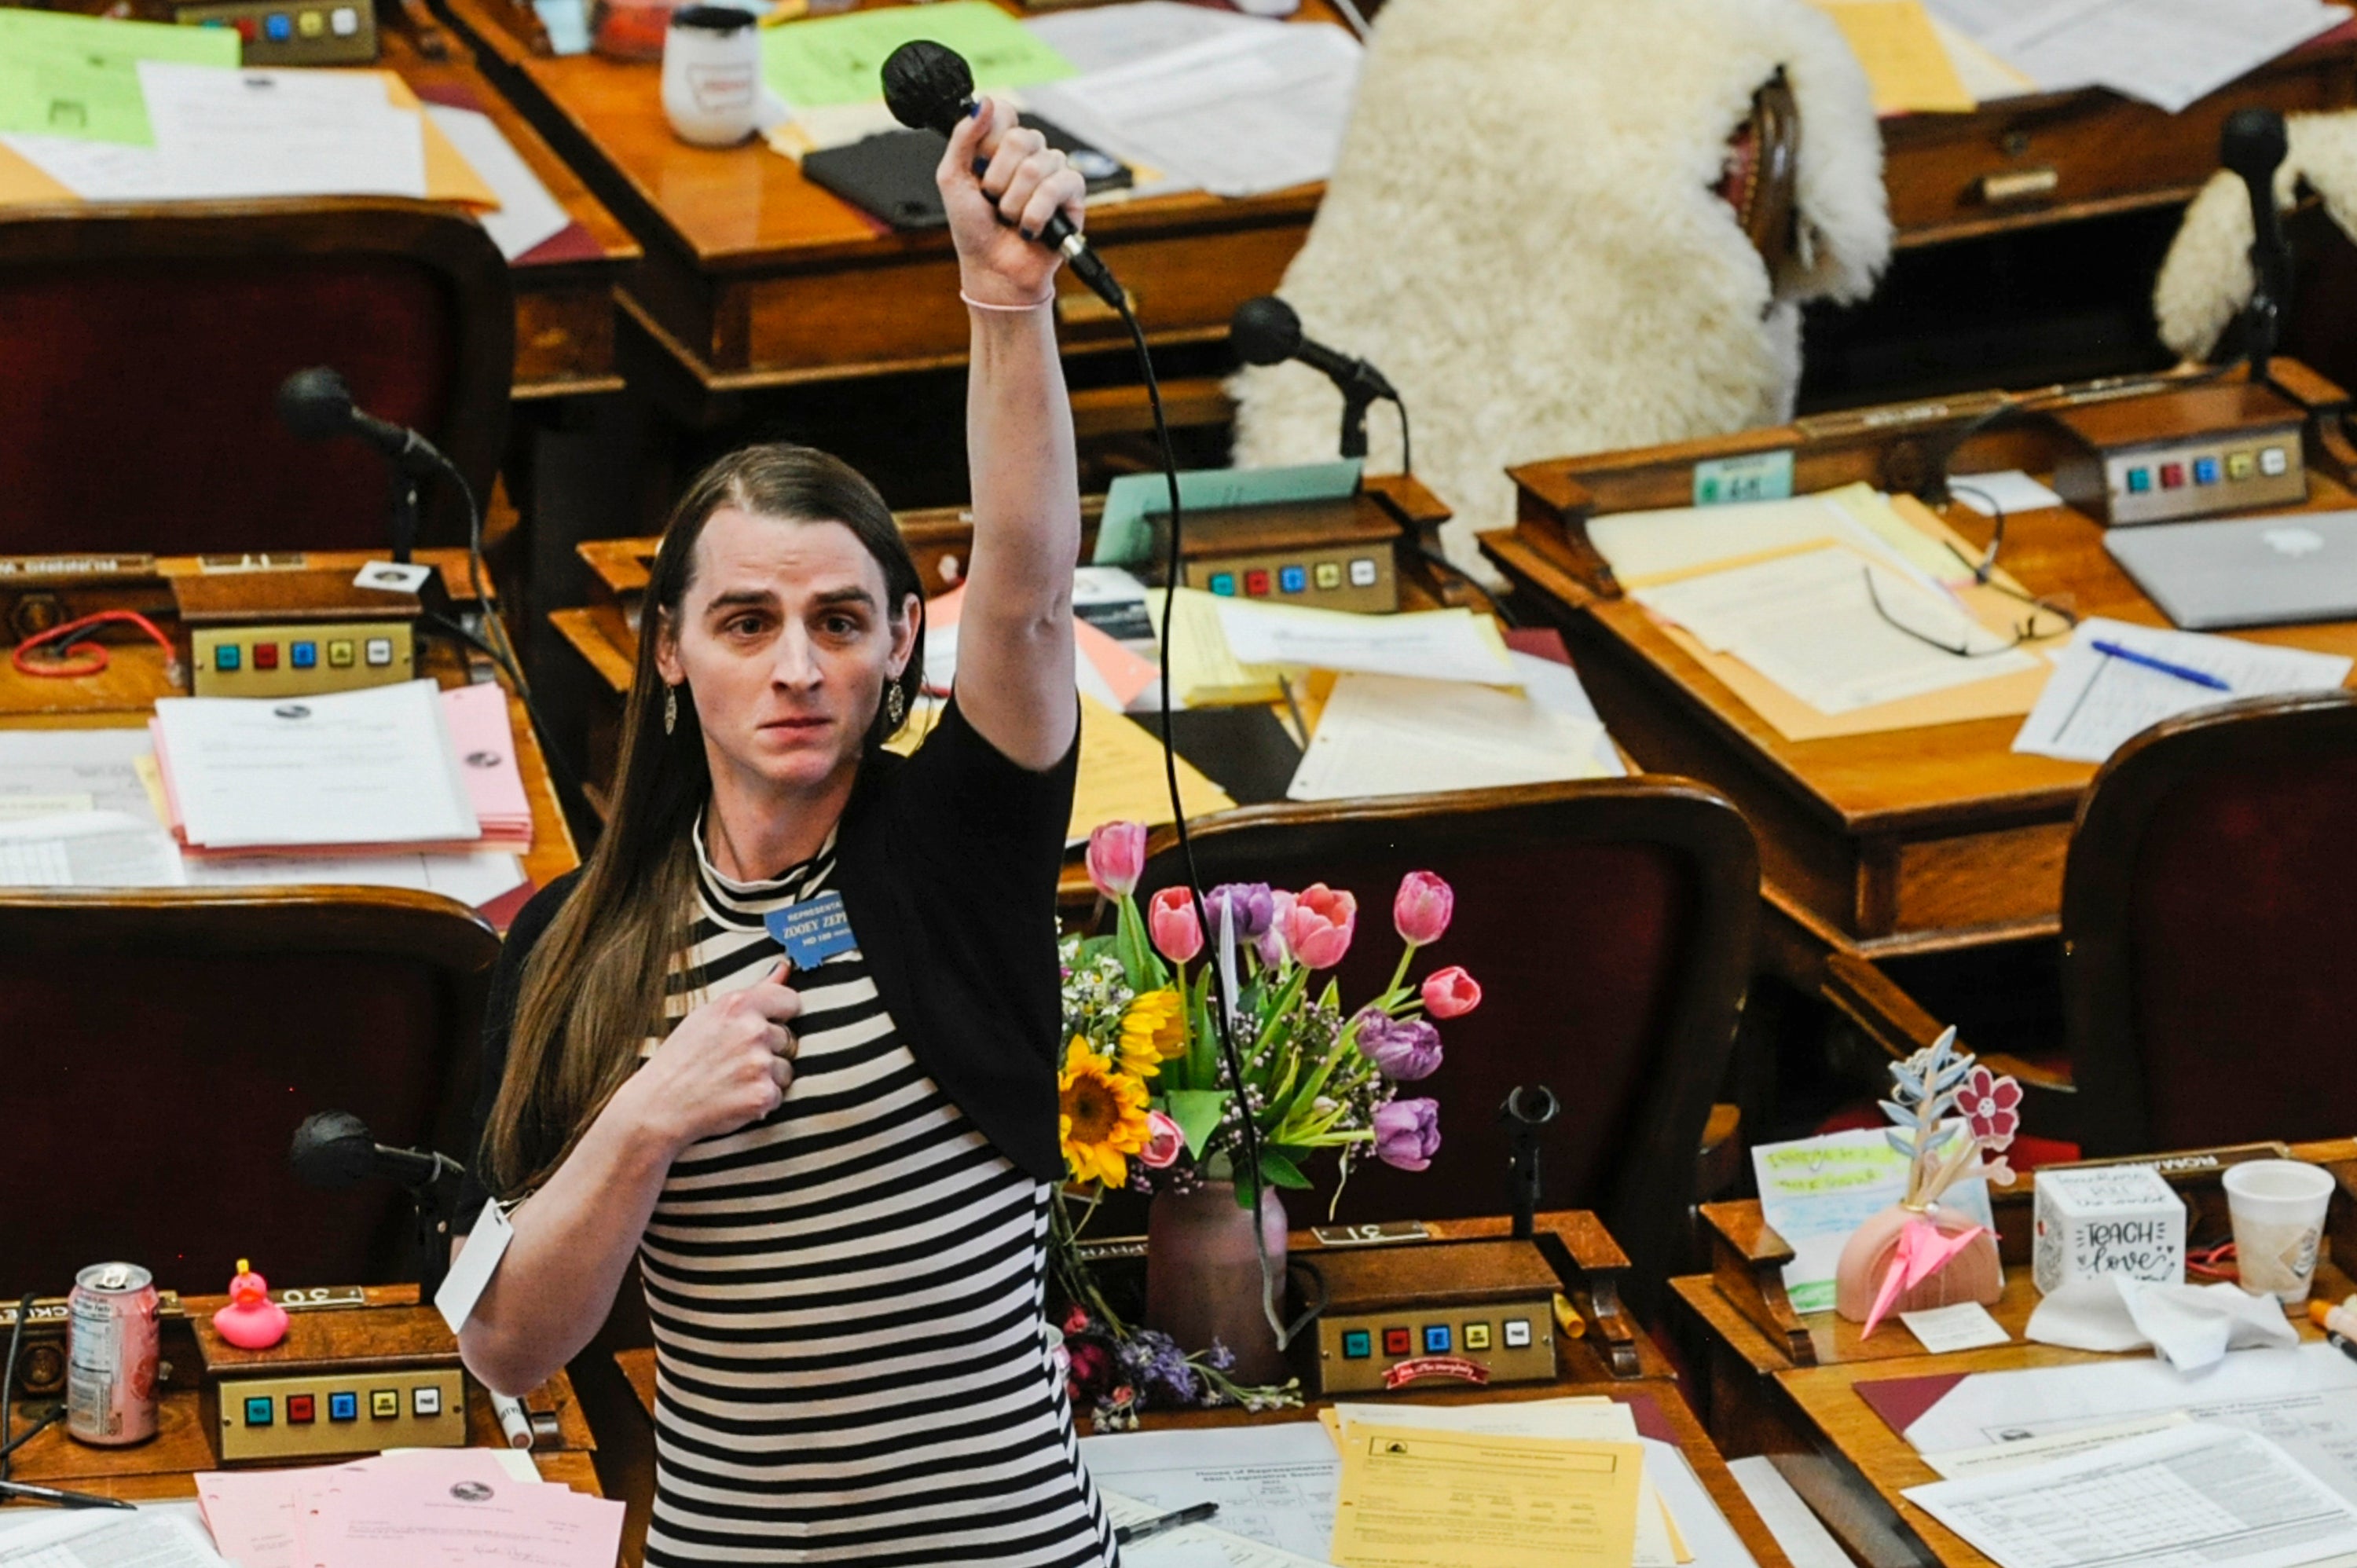 Montana state Rep Zooey Zephyr, the state’s first openly trans legislator, was ousted by Republican lawmakers following her opposition to multiple anti-LGBT+ bills in the 2023 session.